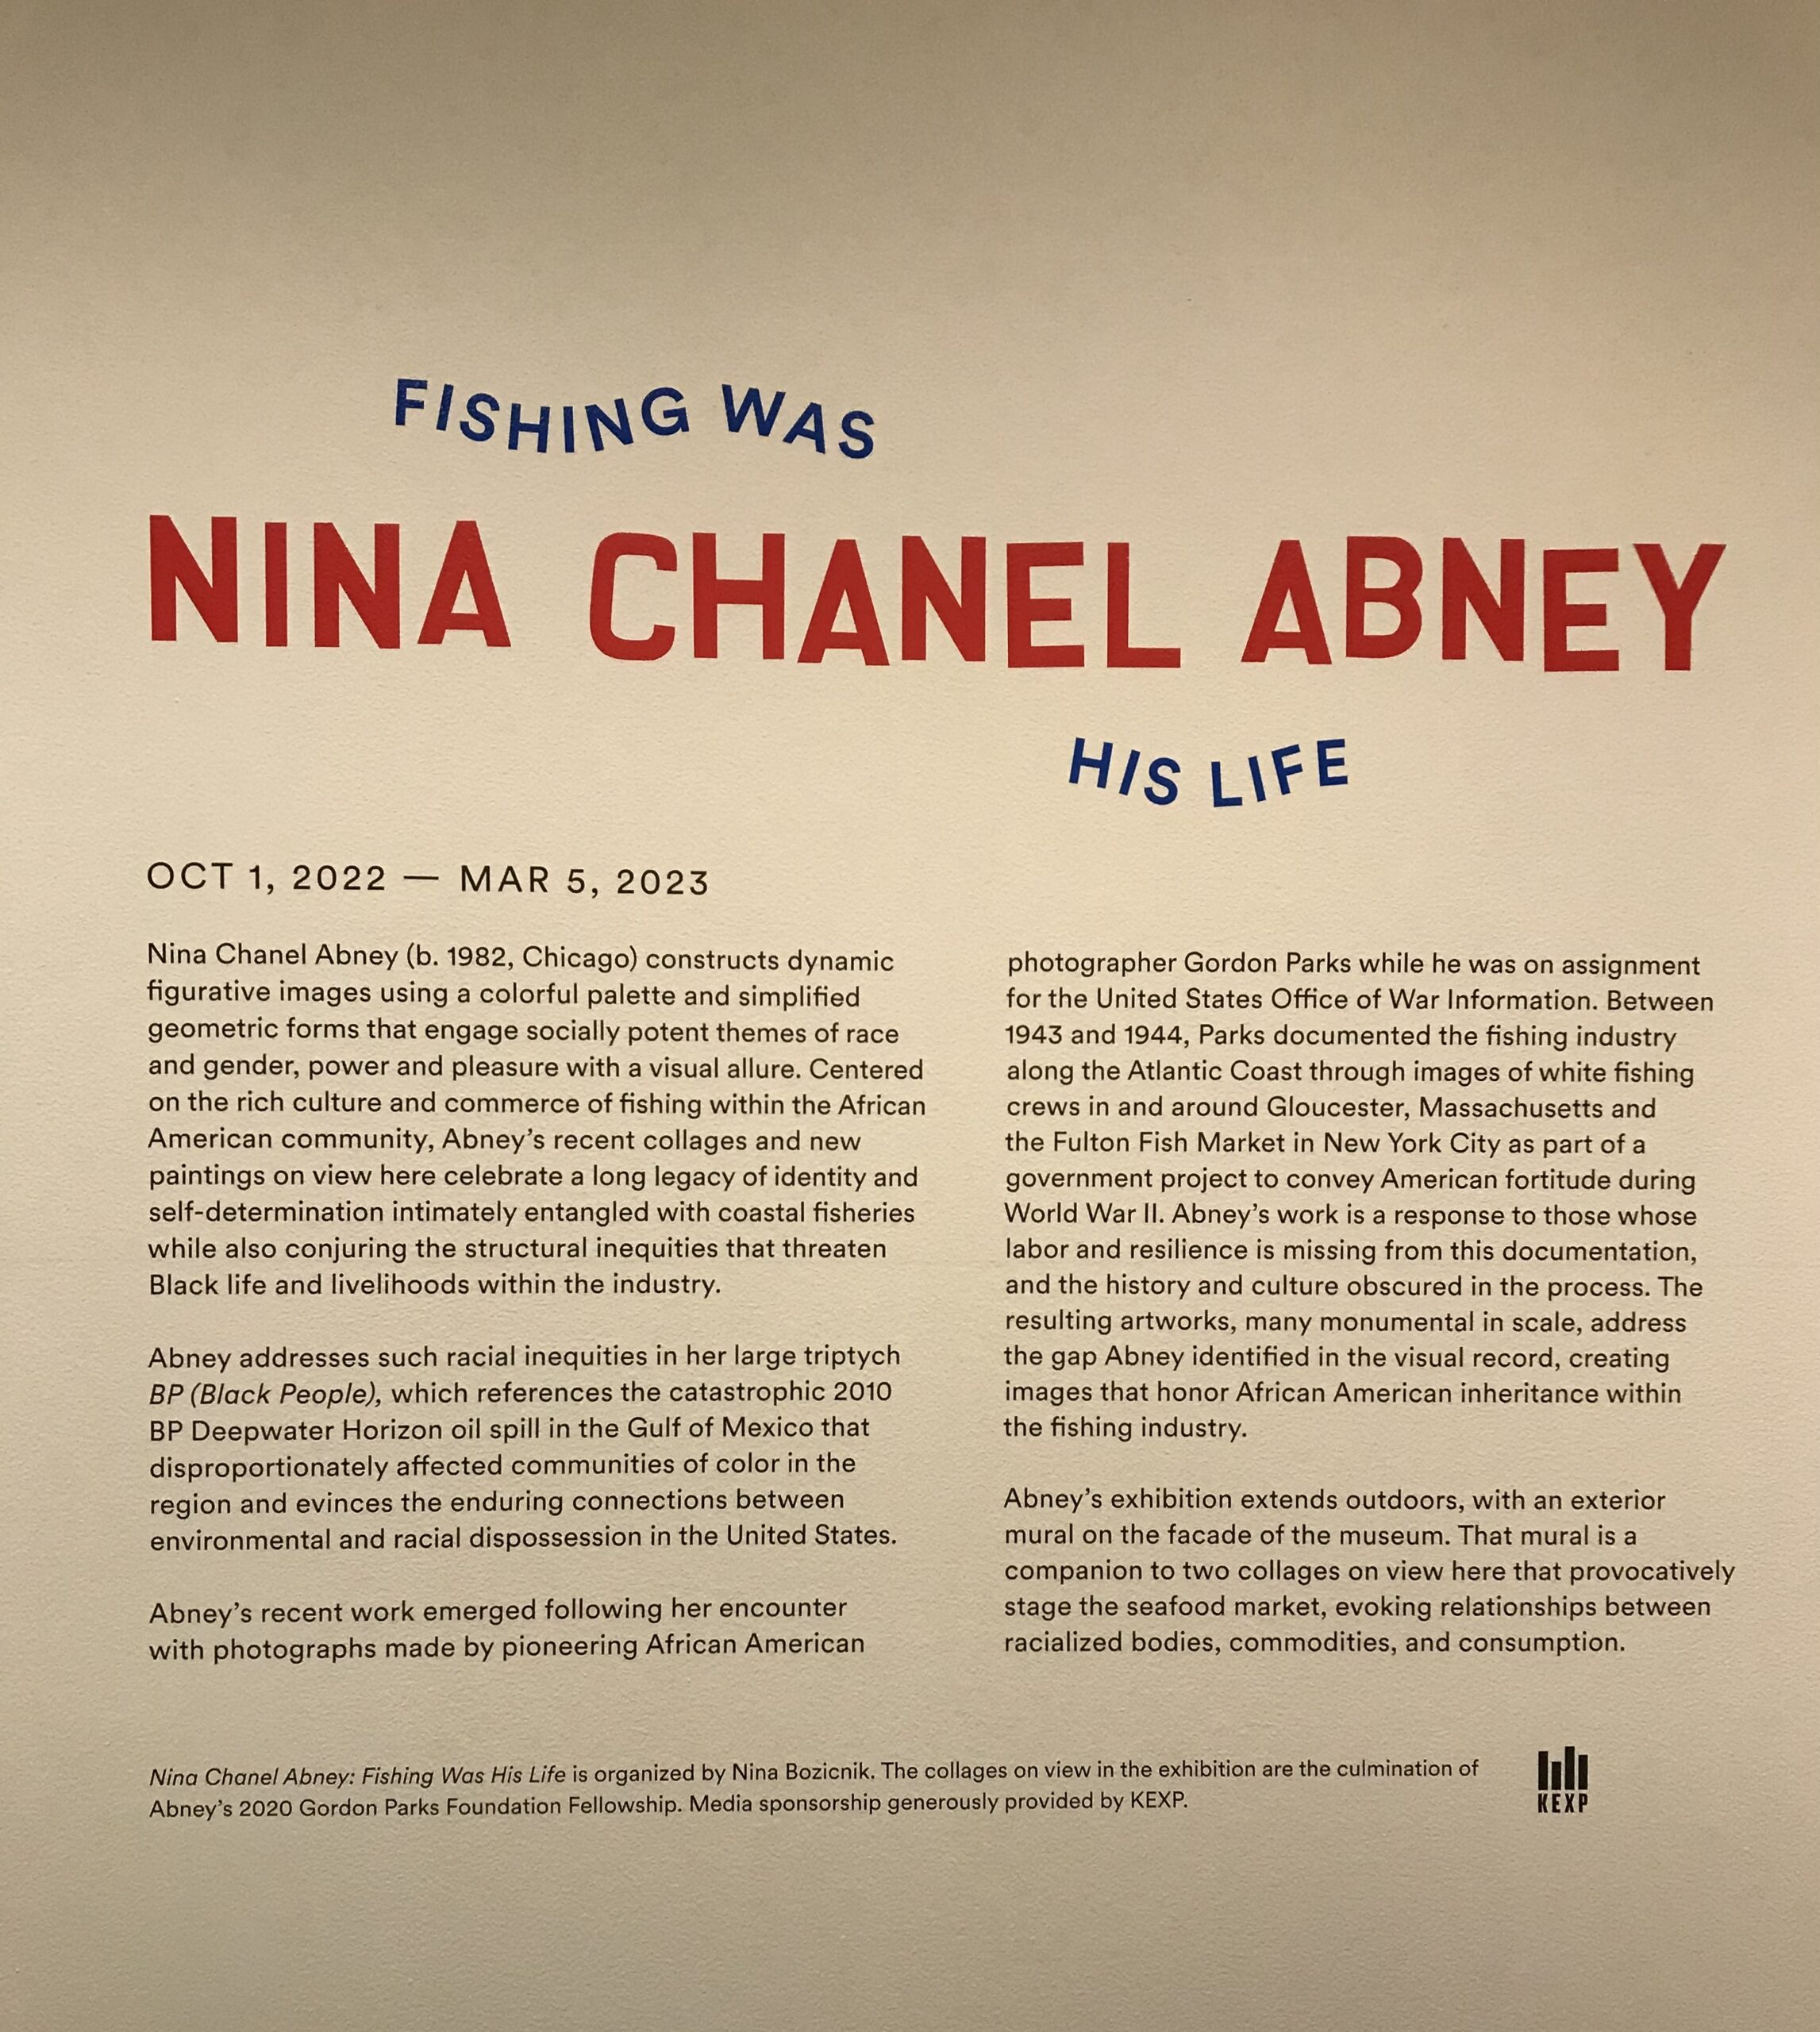 Nina Chanel Abney “Fishing was his life” art exhibition at the Henry Art Gallery, Seattle